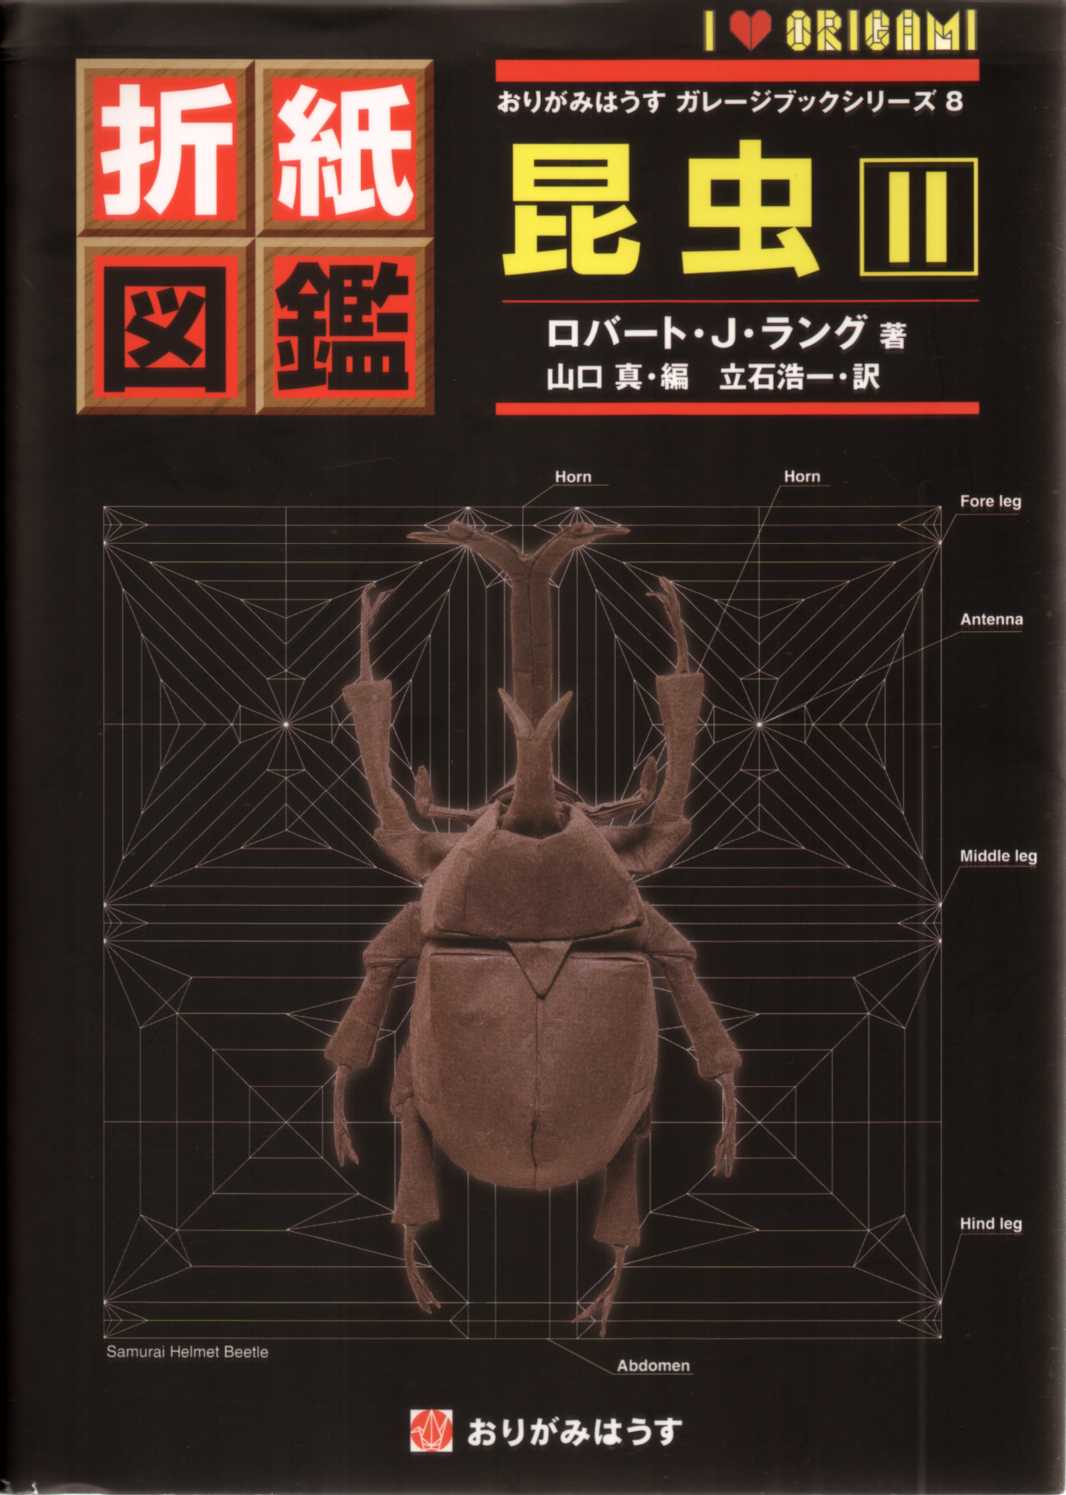 Origami Insects II / 折紙図鑑　昆虫・2 : page 154.